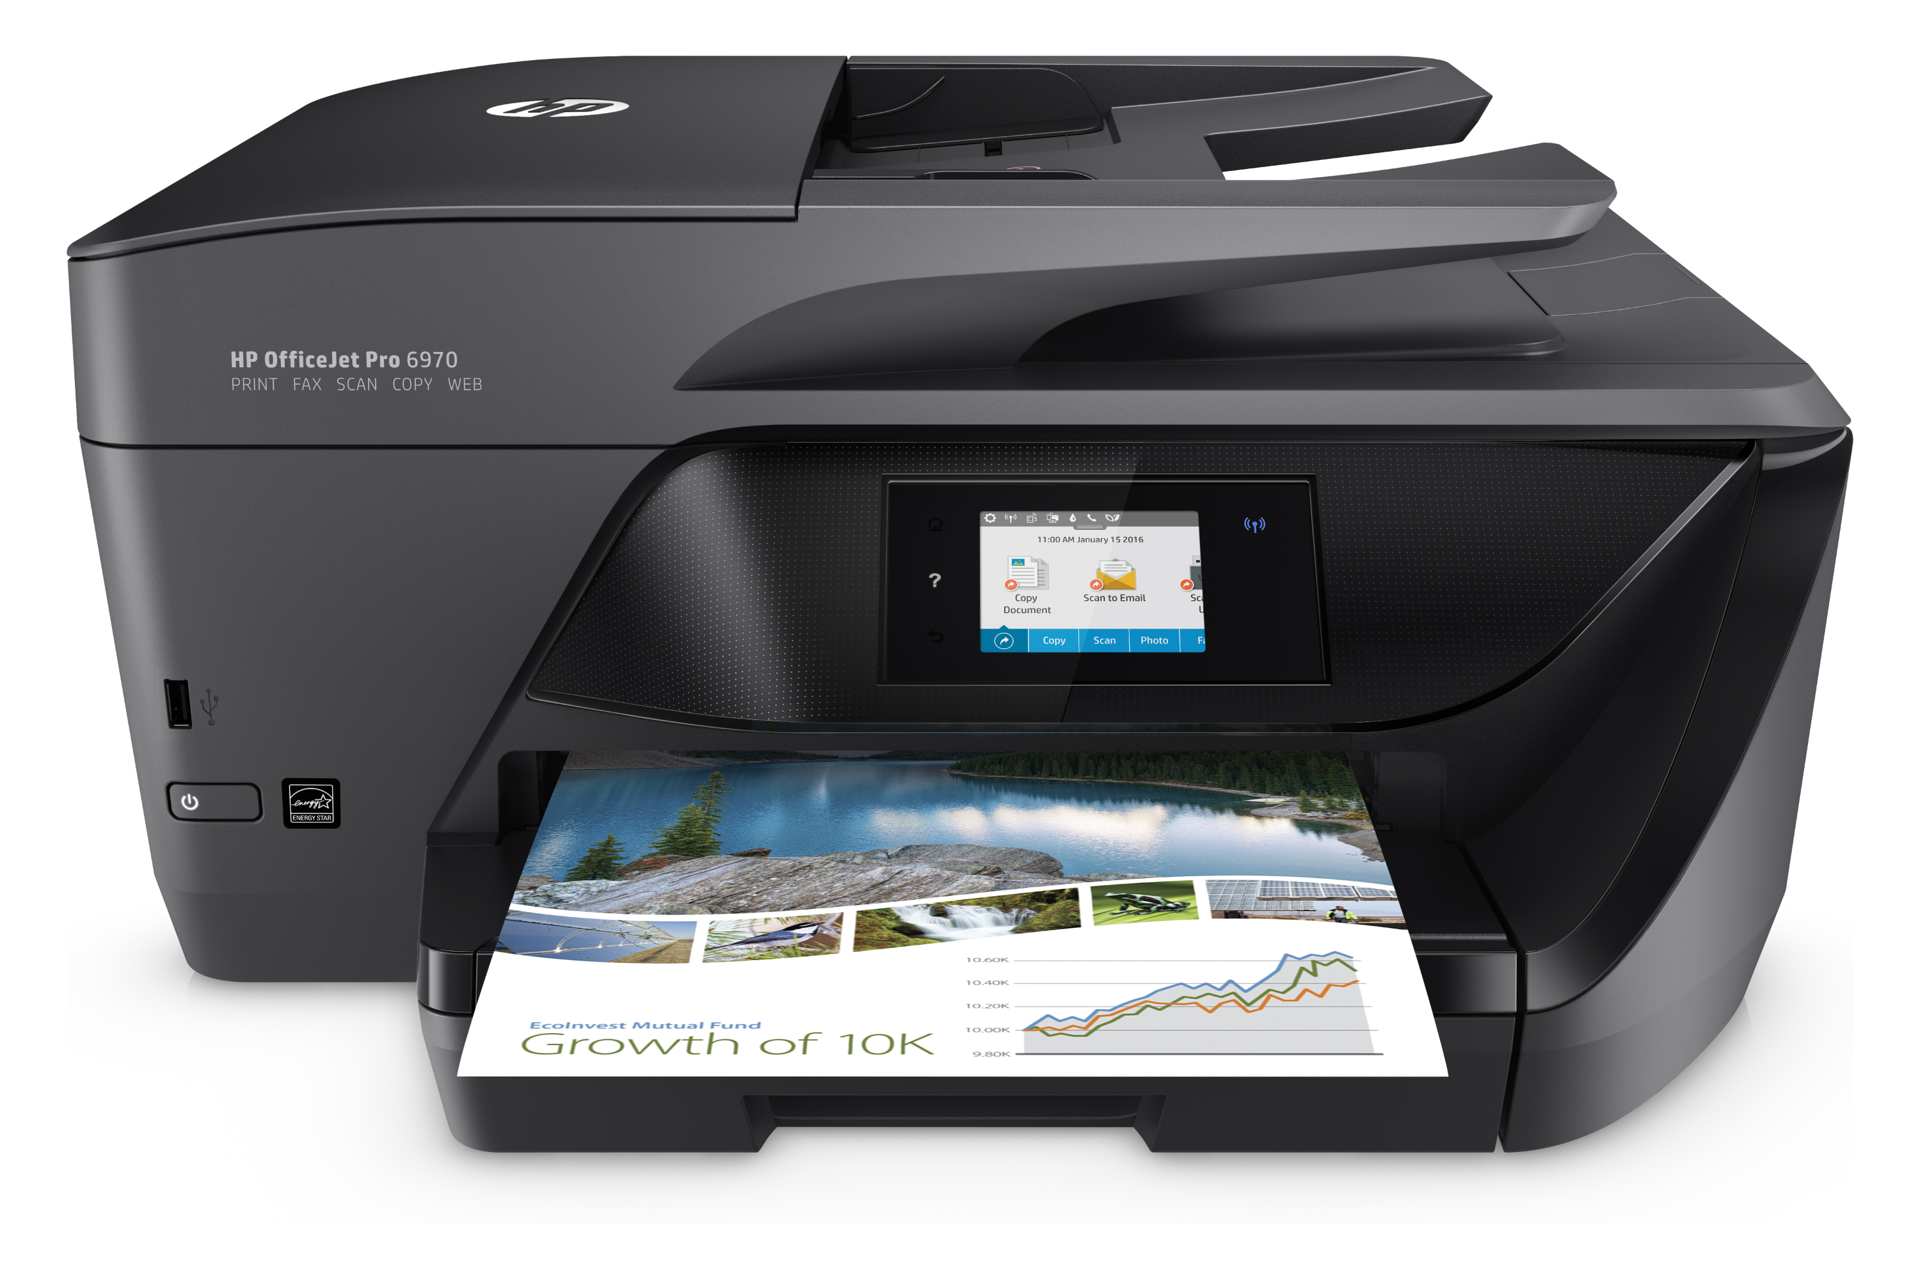 Buy Compatible HP OfficeJet Pro 6970 All-in-One Multipack Ink